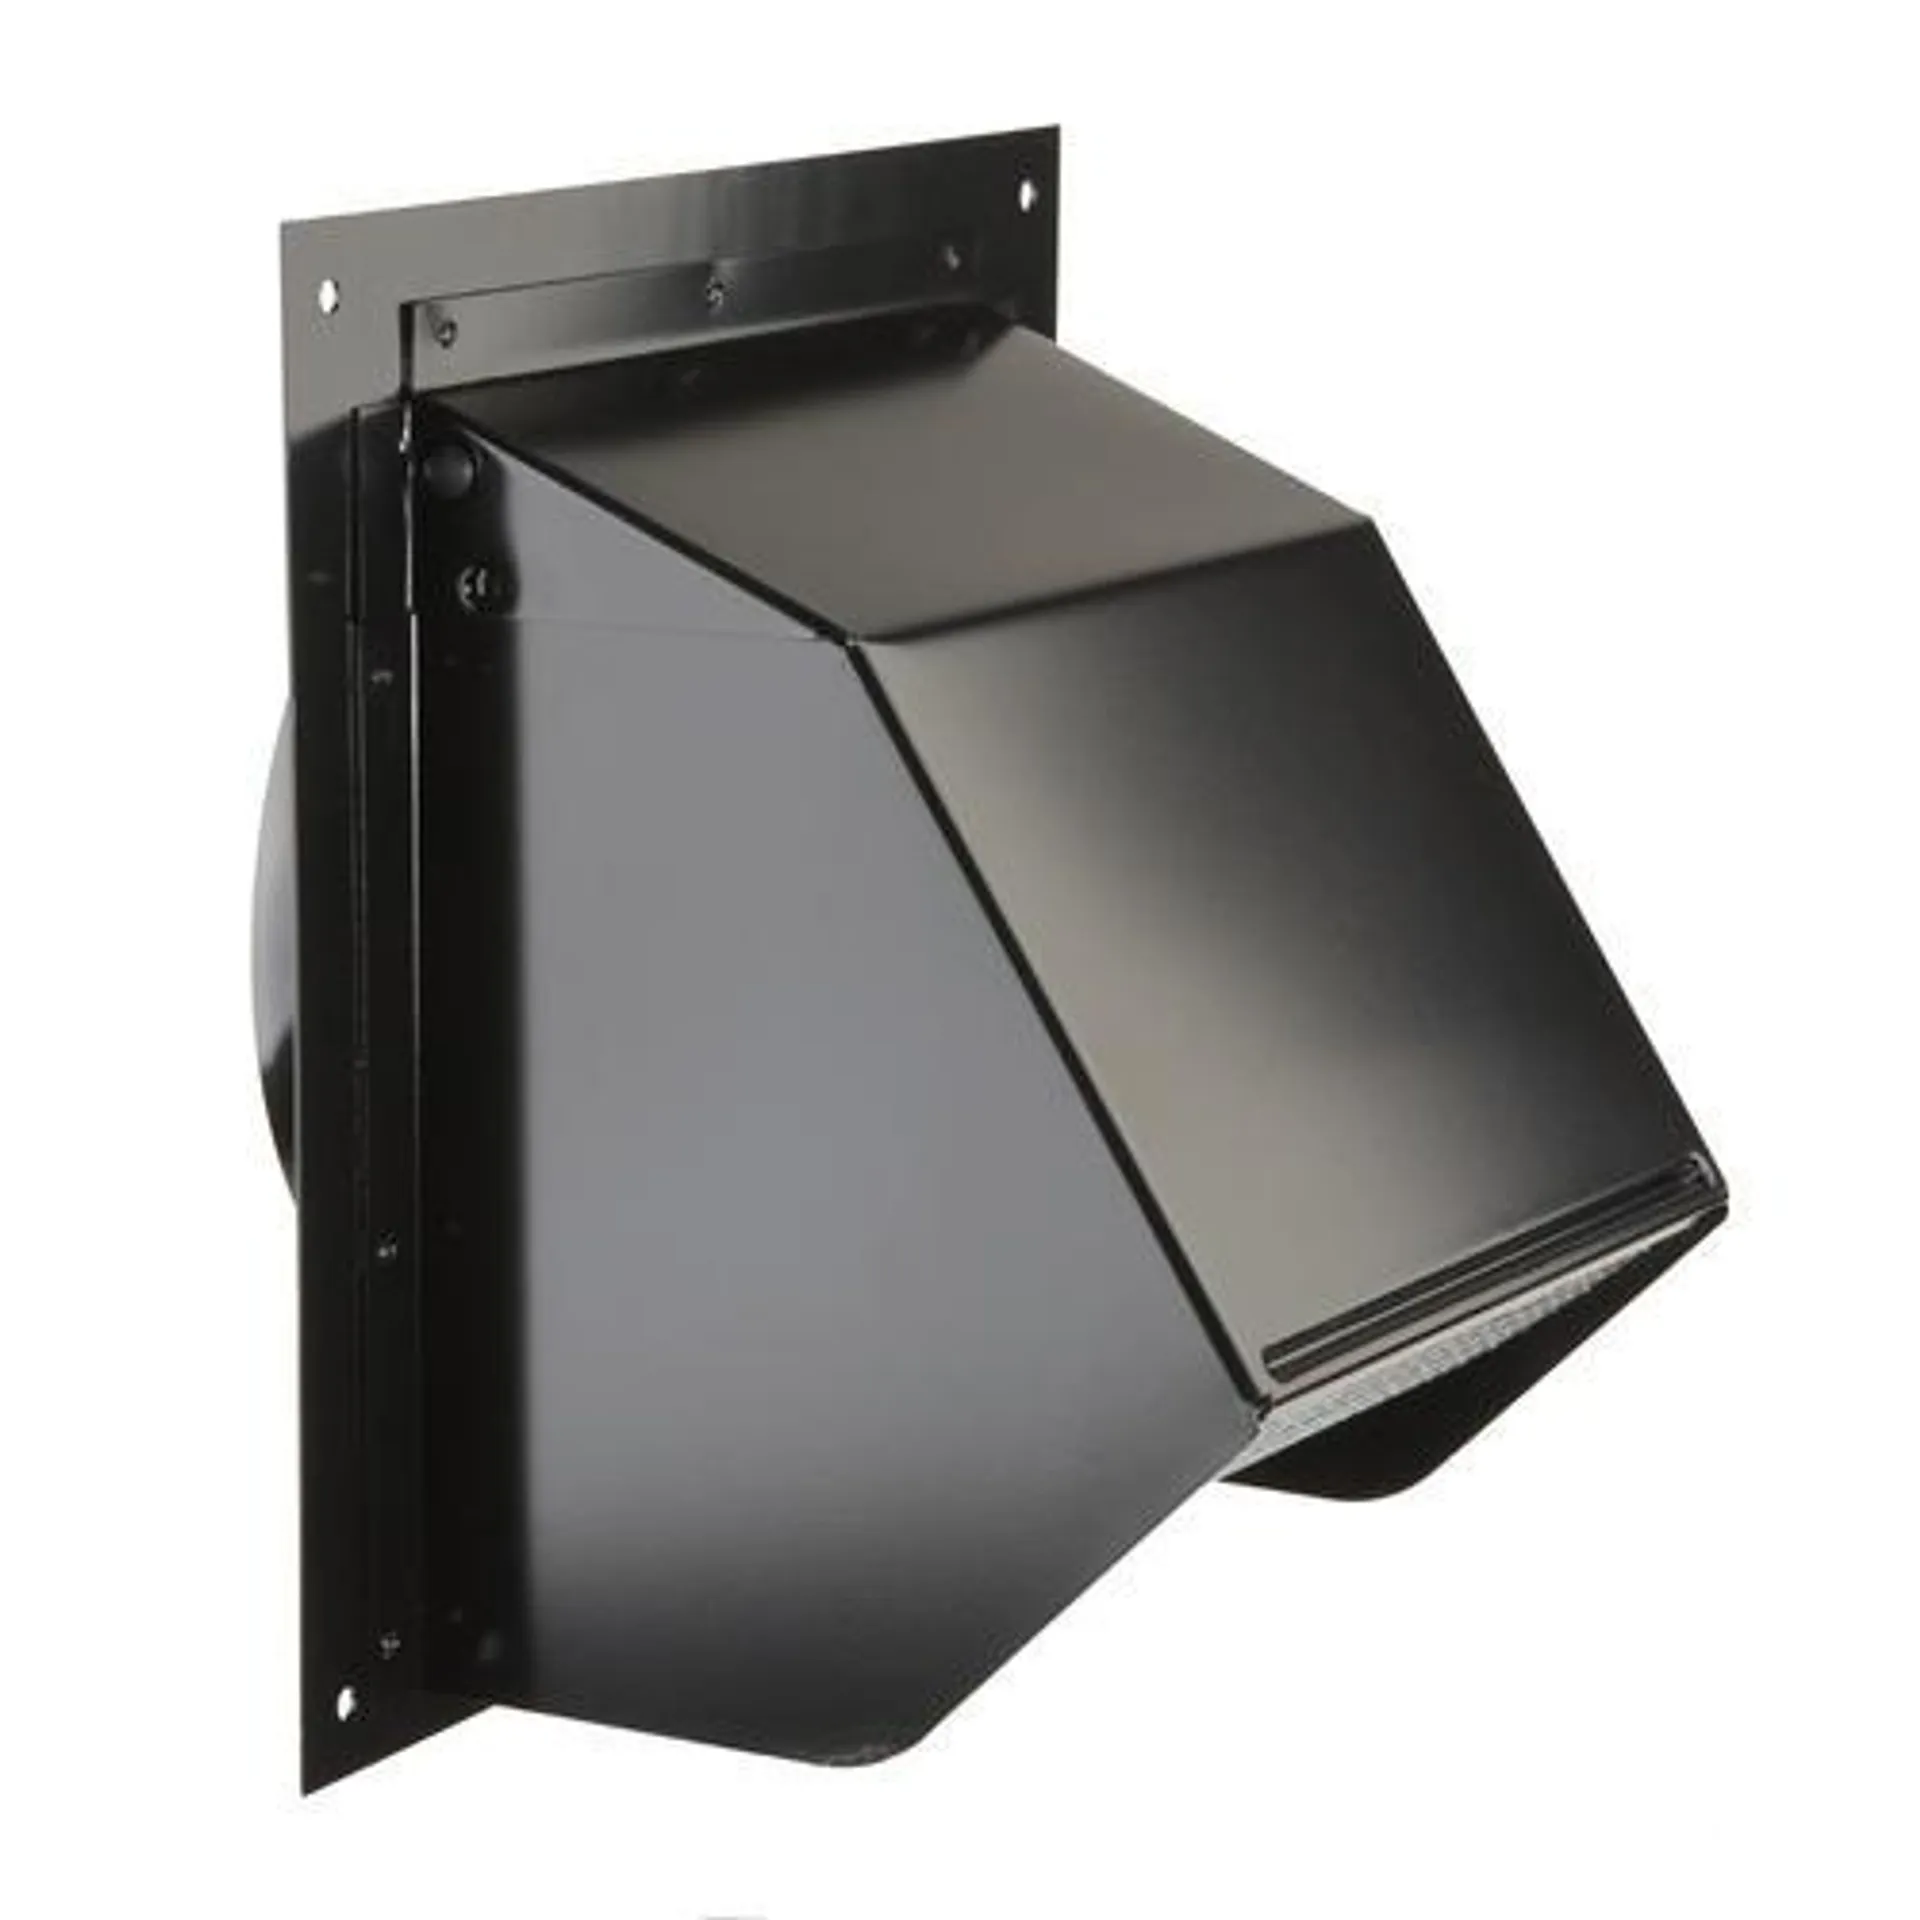 Broan Wall Cap for 6" Round Duct Range Hoods and Bath Fans